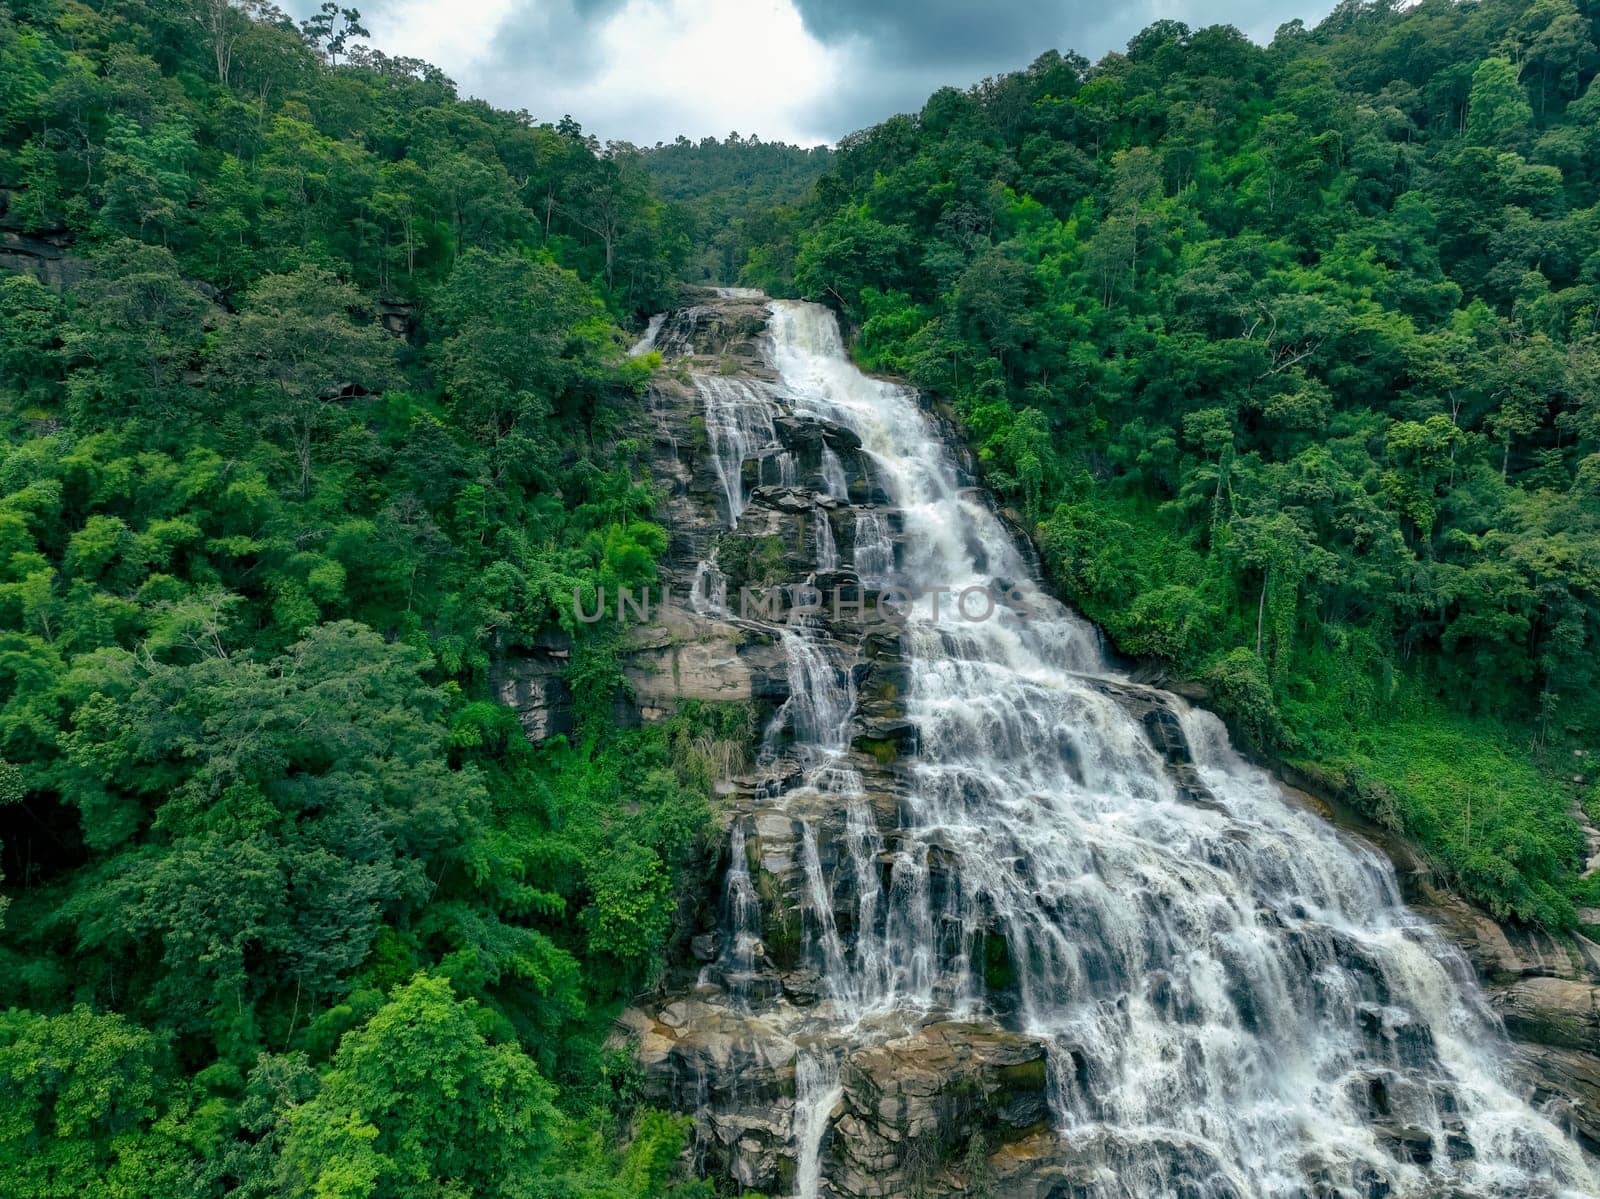 Large waterfall with lush green forest in the background. Nature landscape. Water is crystal clear and trees are full and green. Scene is serene and peaceful. Waterfall in Doi Inthanon National Park by Fahroni